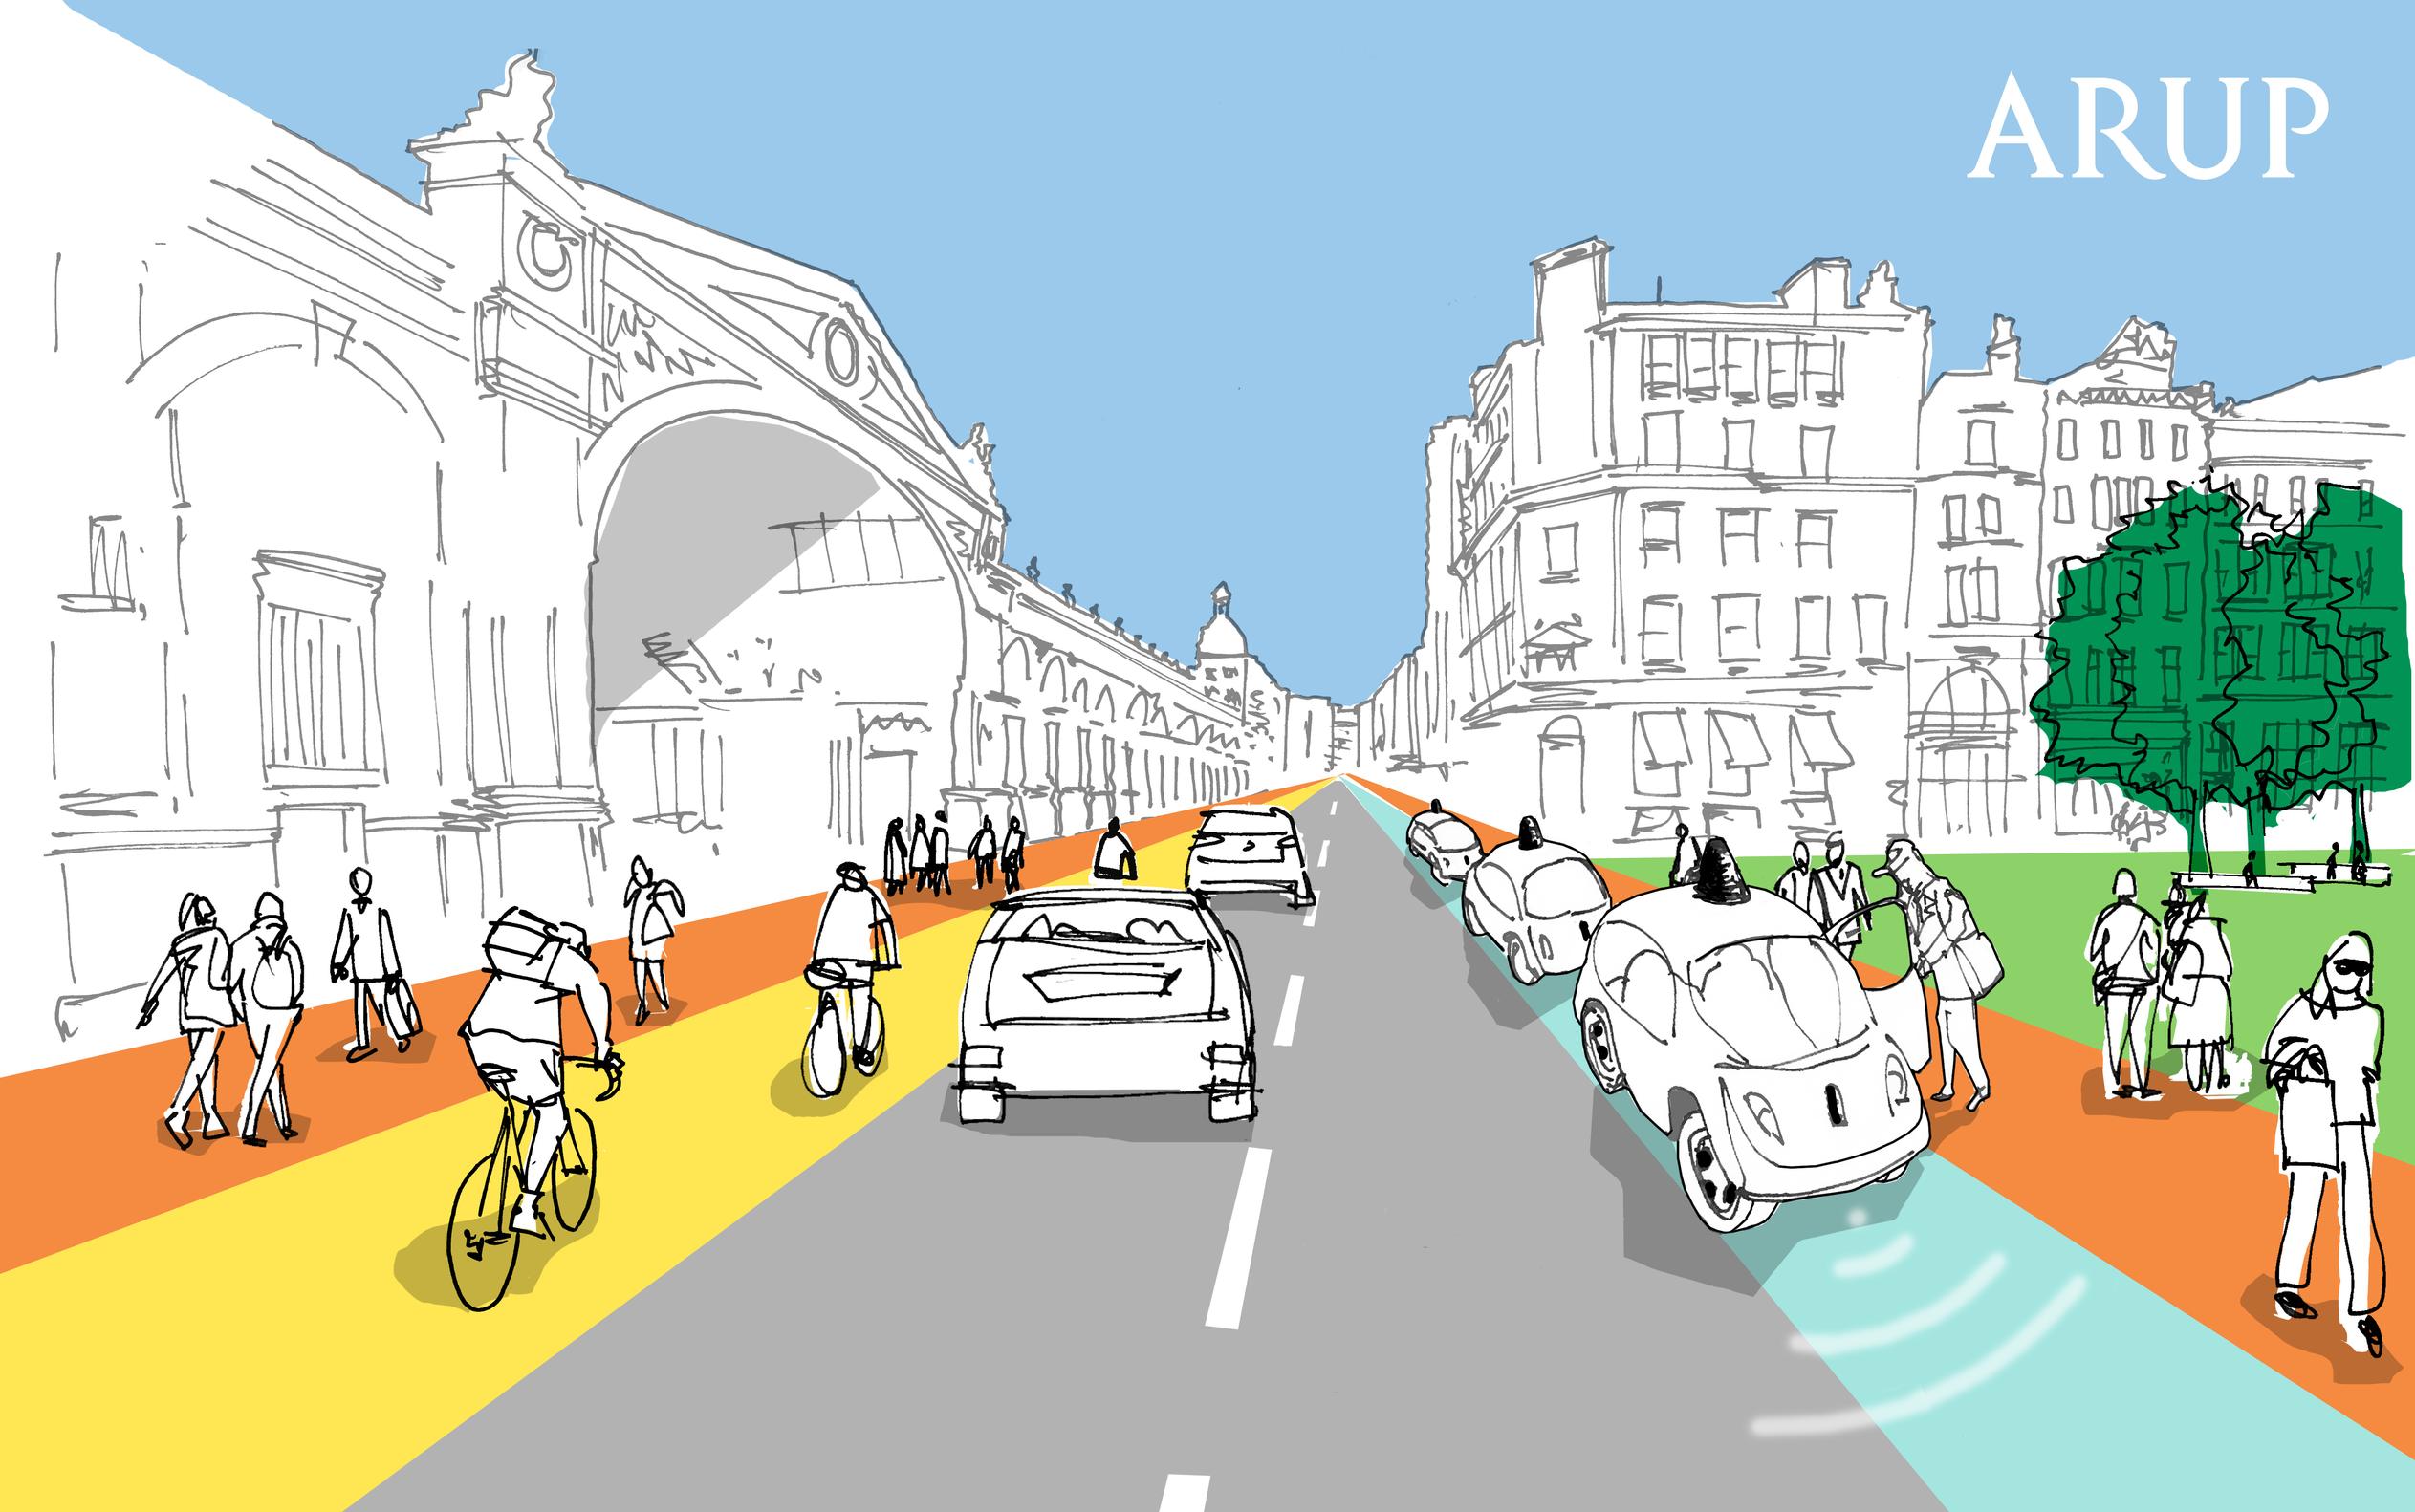 Arup’s FlexKerb initiative proposes that kerb usage could change to react to demand from pedestrians, cyclists and from CAVs throughout the course of the day, in order to maximise the capacity of the space for pedestrians, cyclists and vehicles – and also monitor air quality